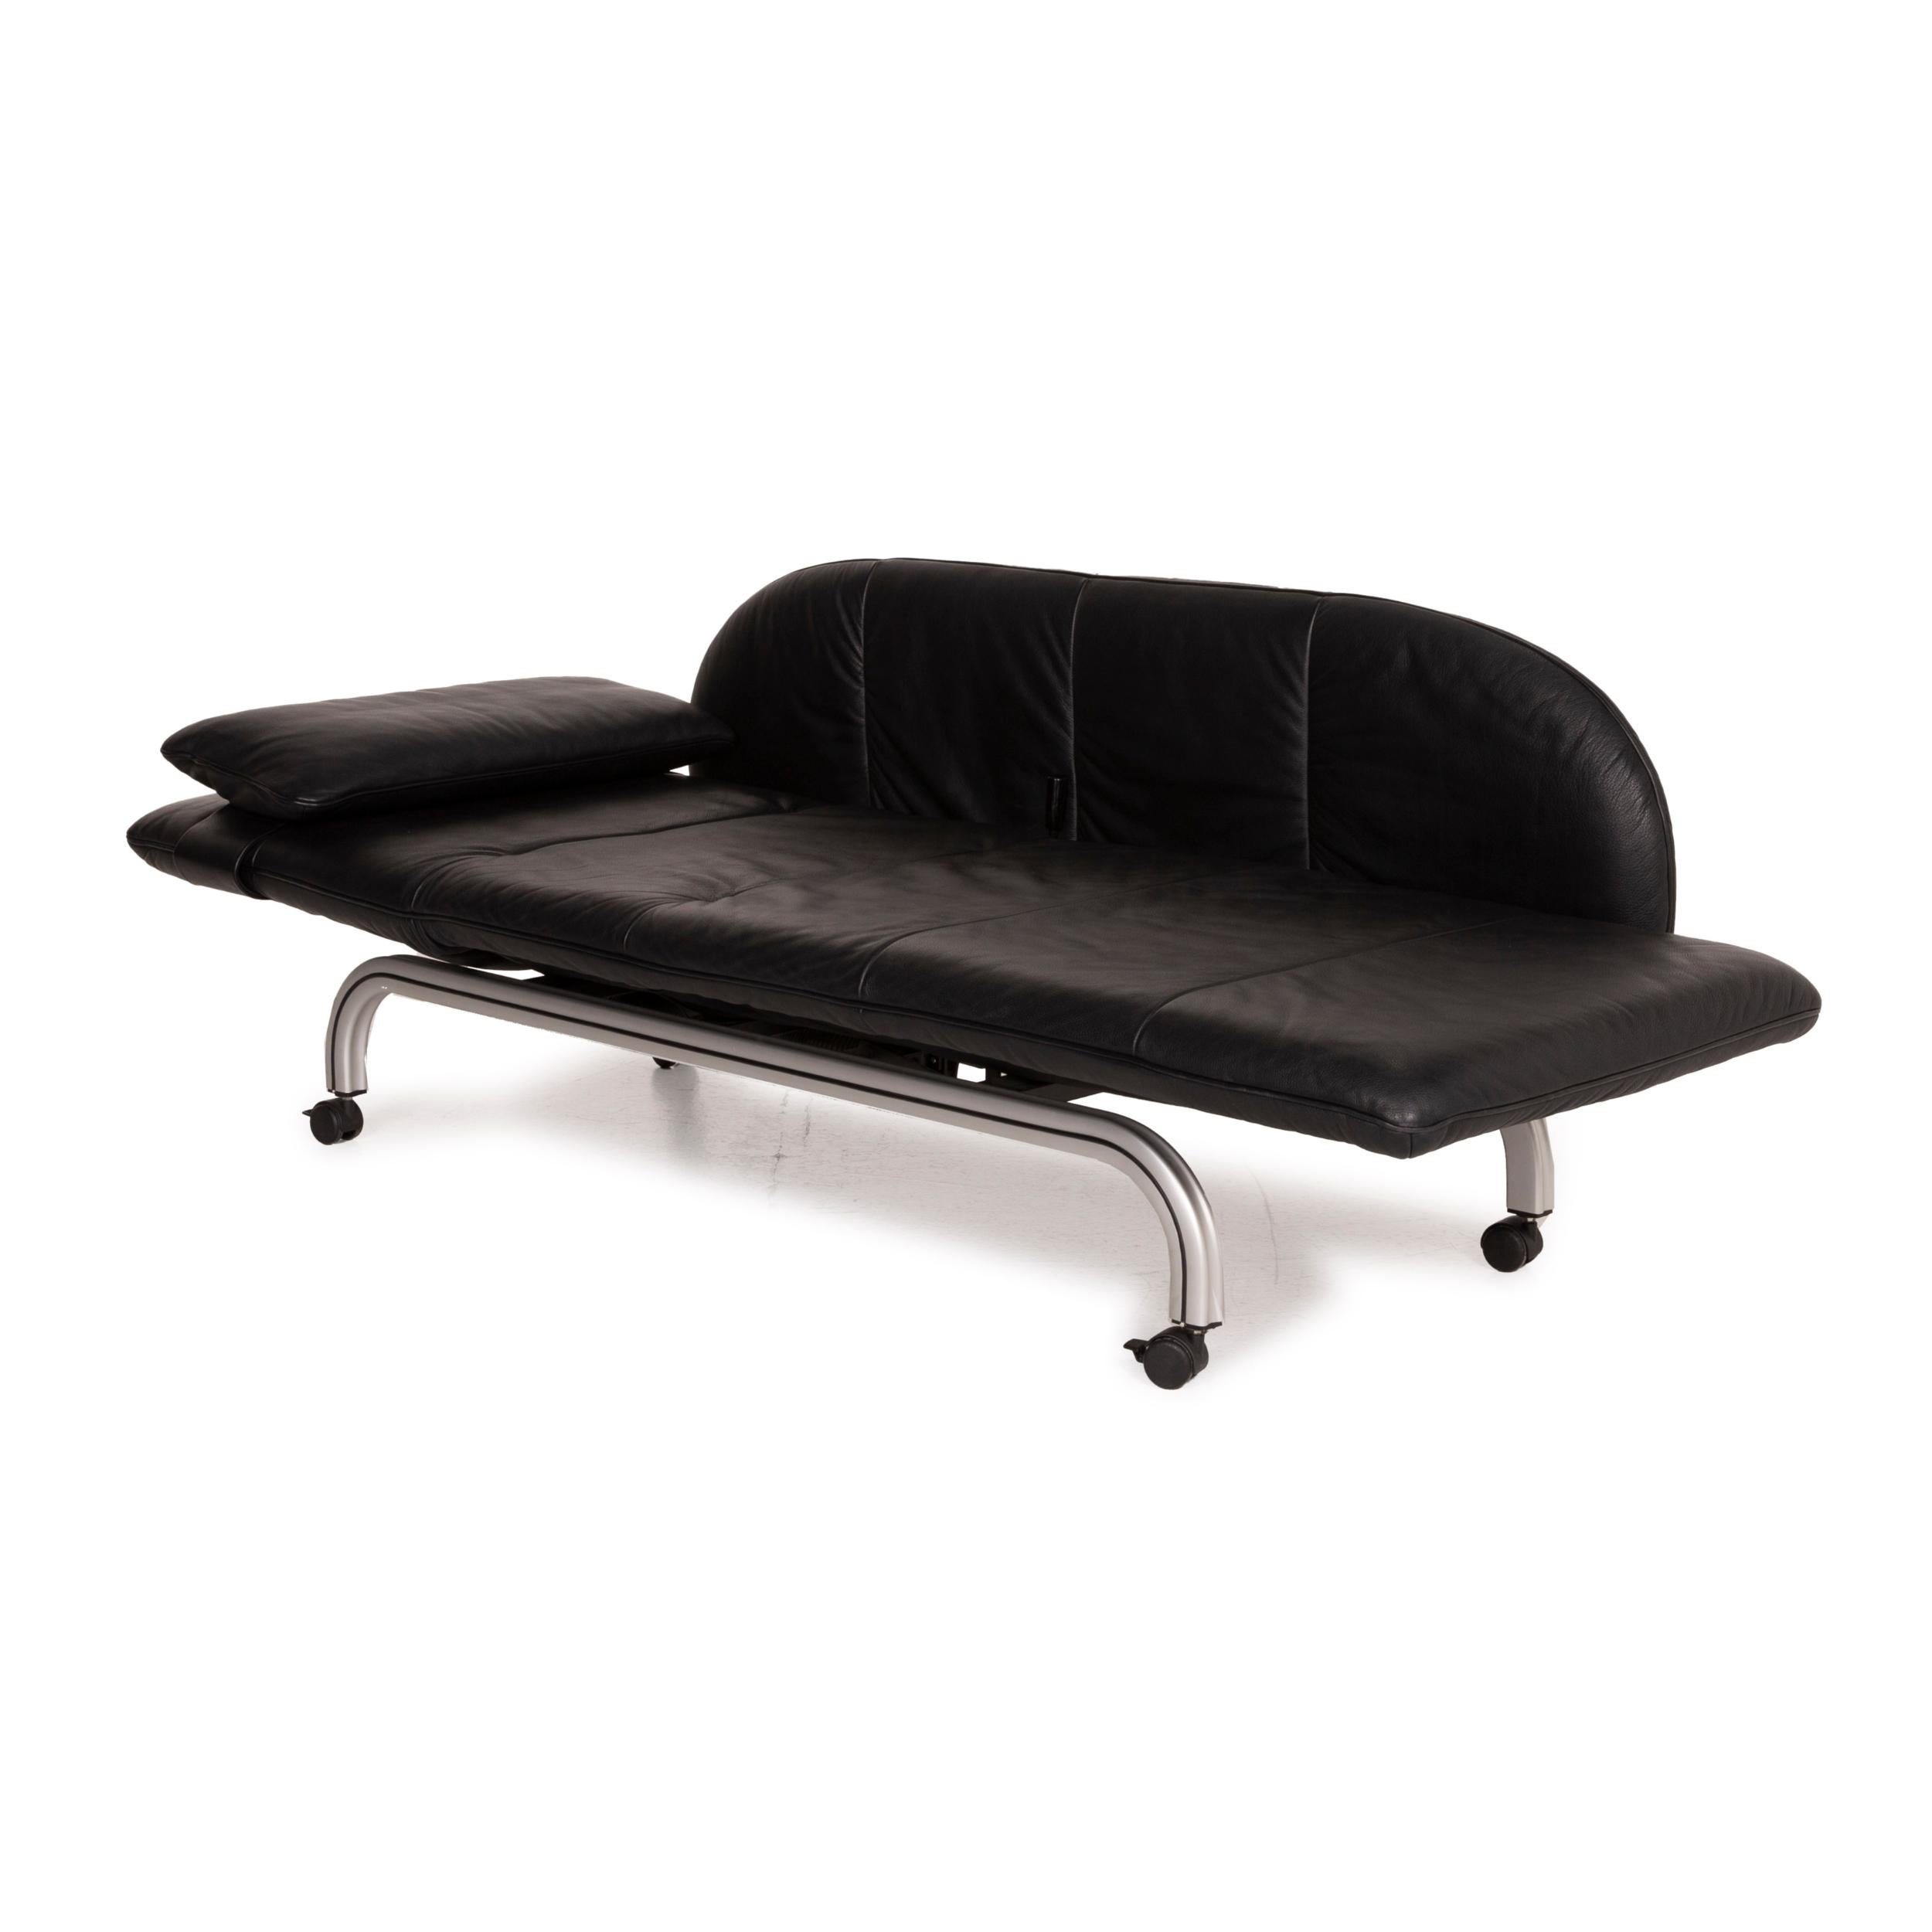 Interprofil Beo Leather Lounger Black Function Two-Seater 1